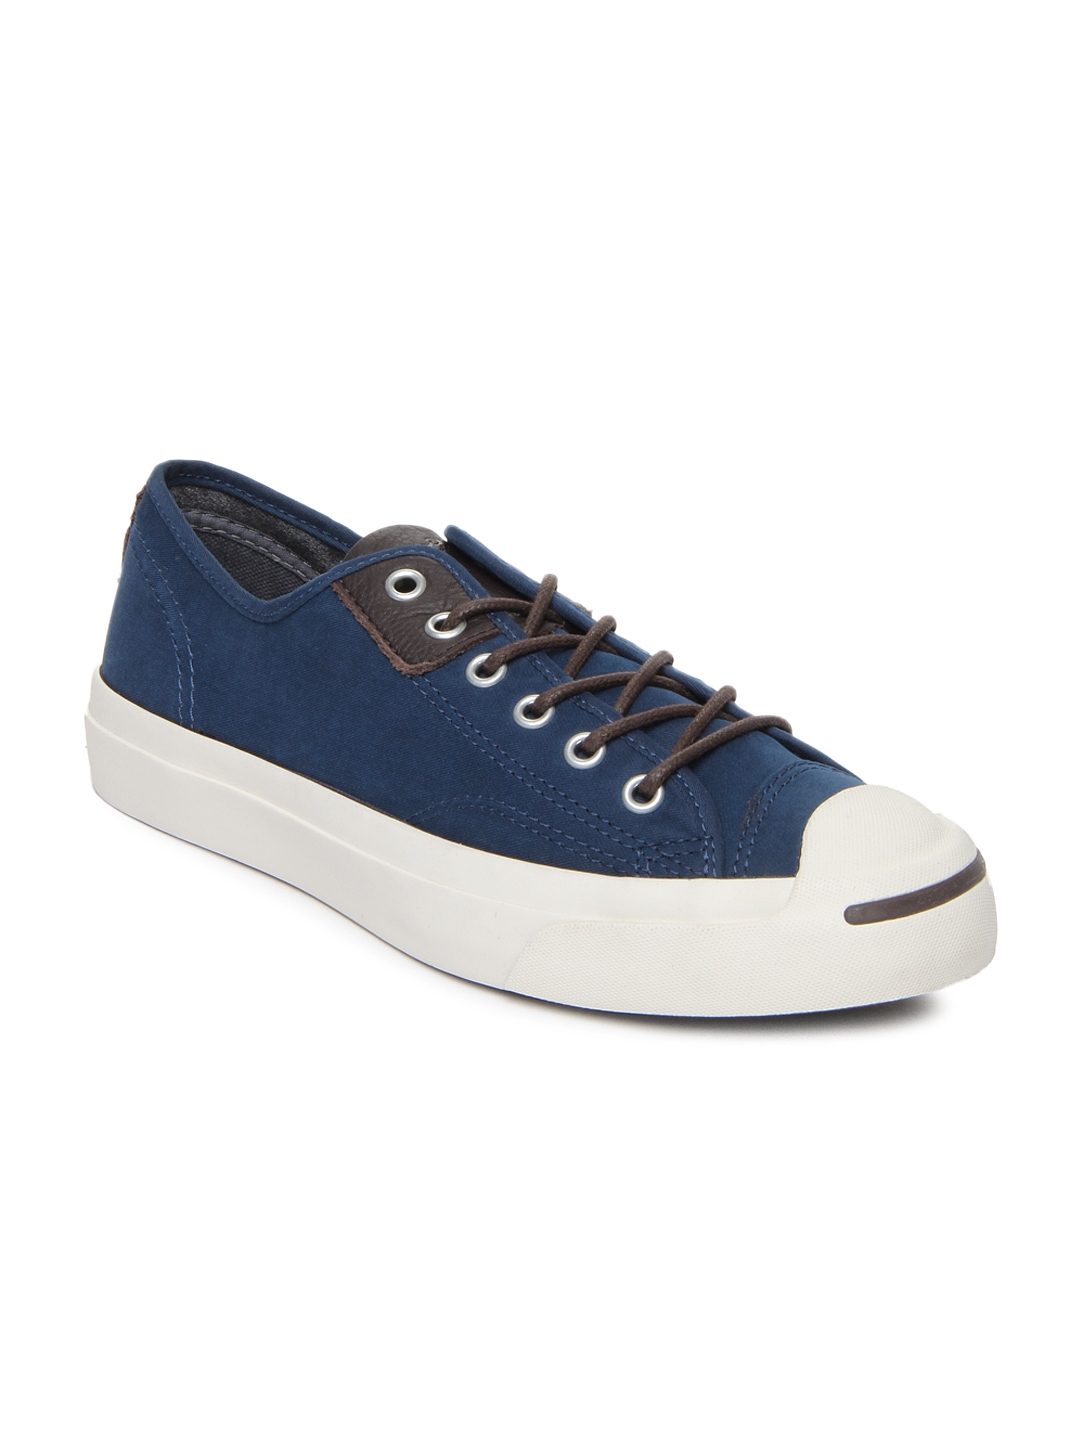 converse jack purcell india online